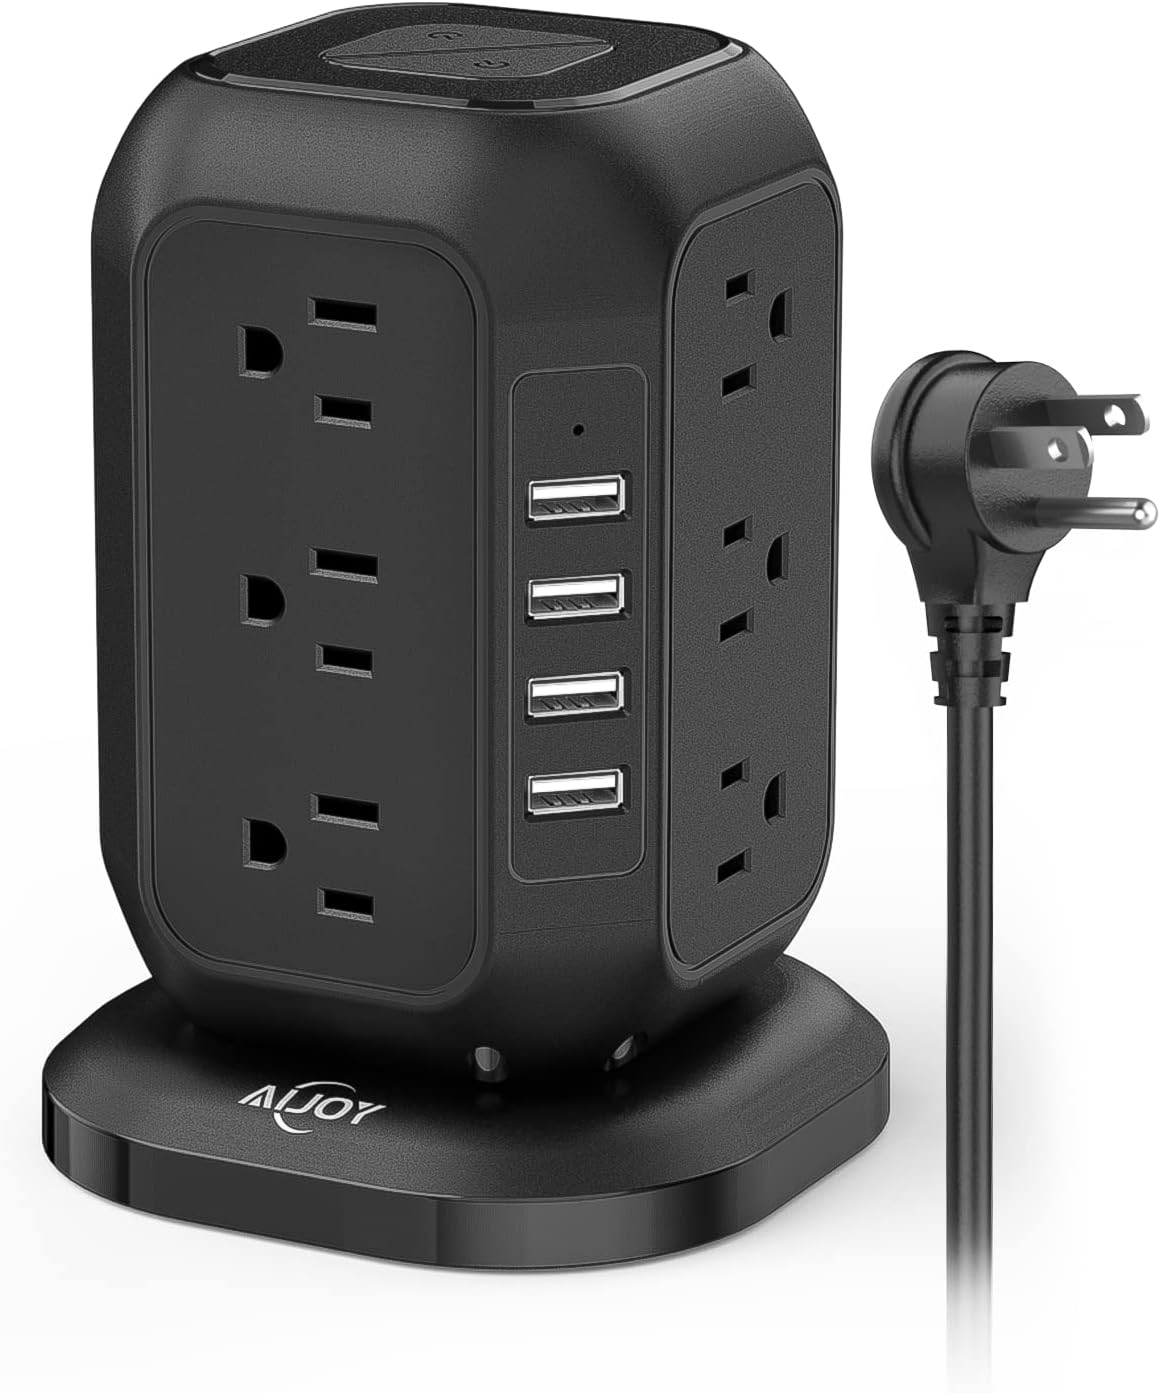 Power Strip Tower with USB Ports-AiJoy Surge Protector with 12 AC Outlet and 4 USB Ports, 10 Feet Extension Cord, USB Charging Station with Overload Protection